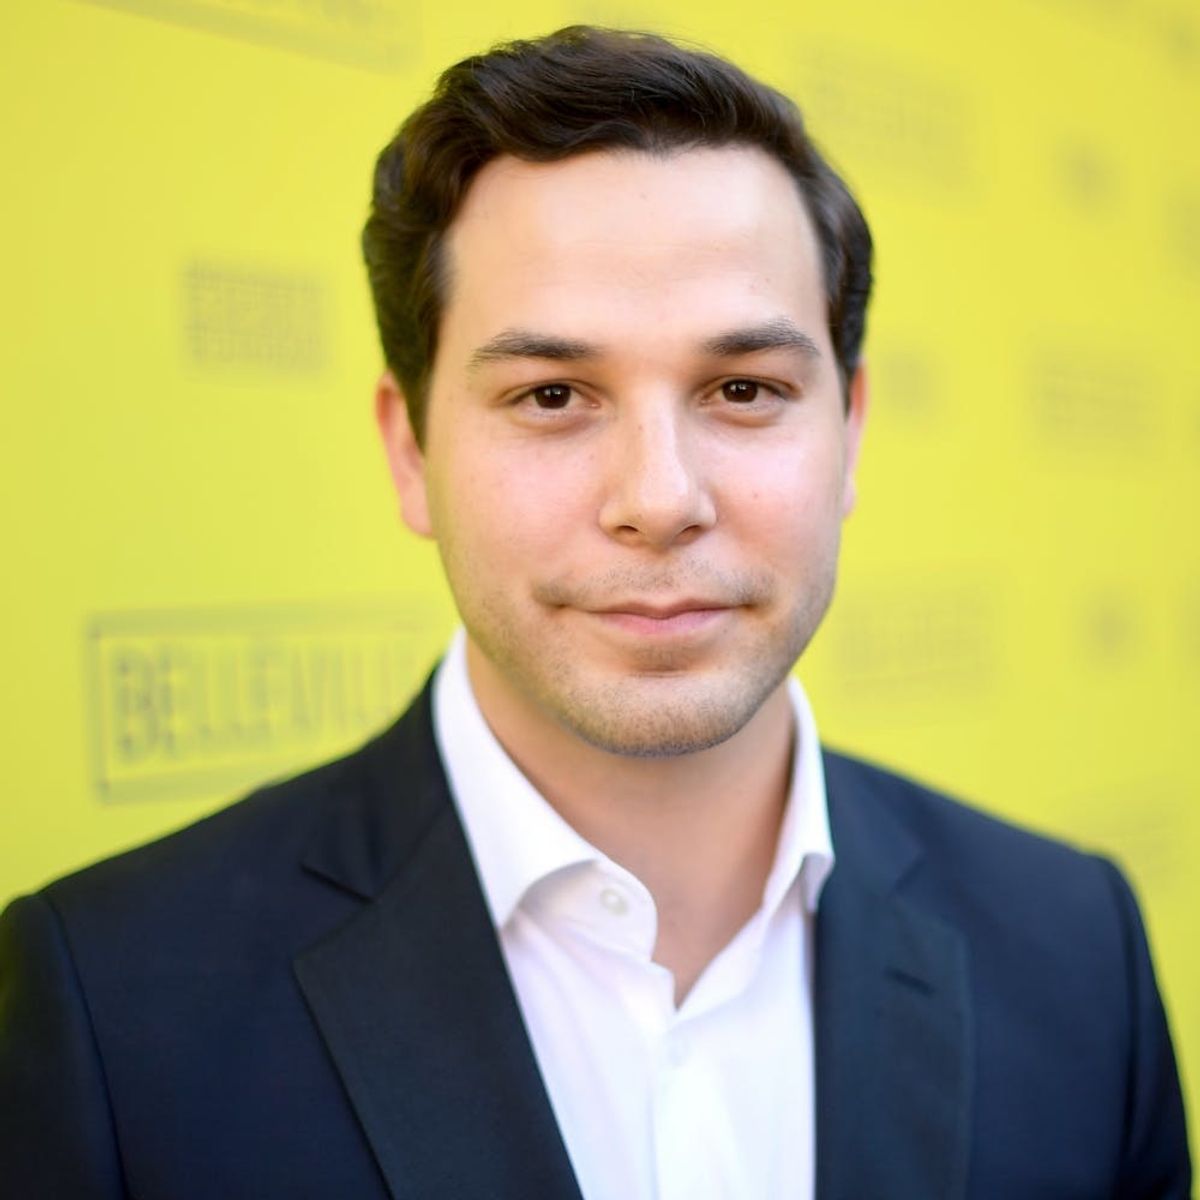 Pitch Perfect’s Skylar Astin Is Joining ‘Crazy Ex-Girlfriend’ in an Unexpected Role